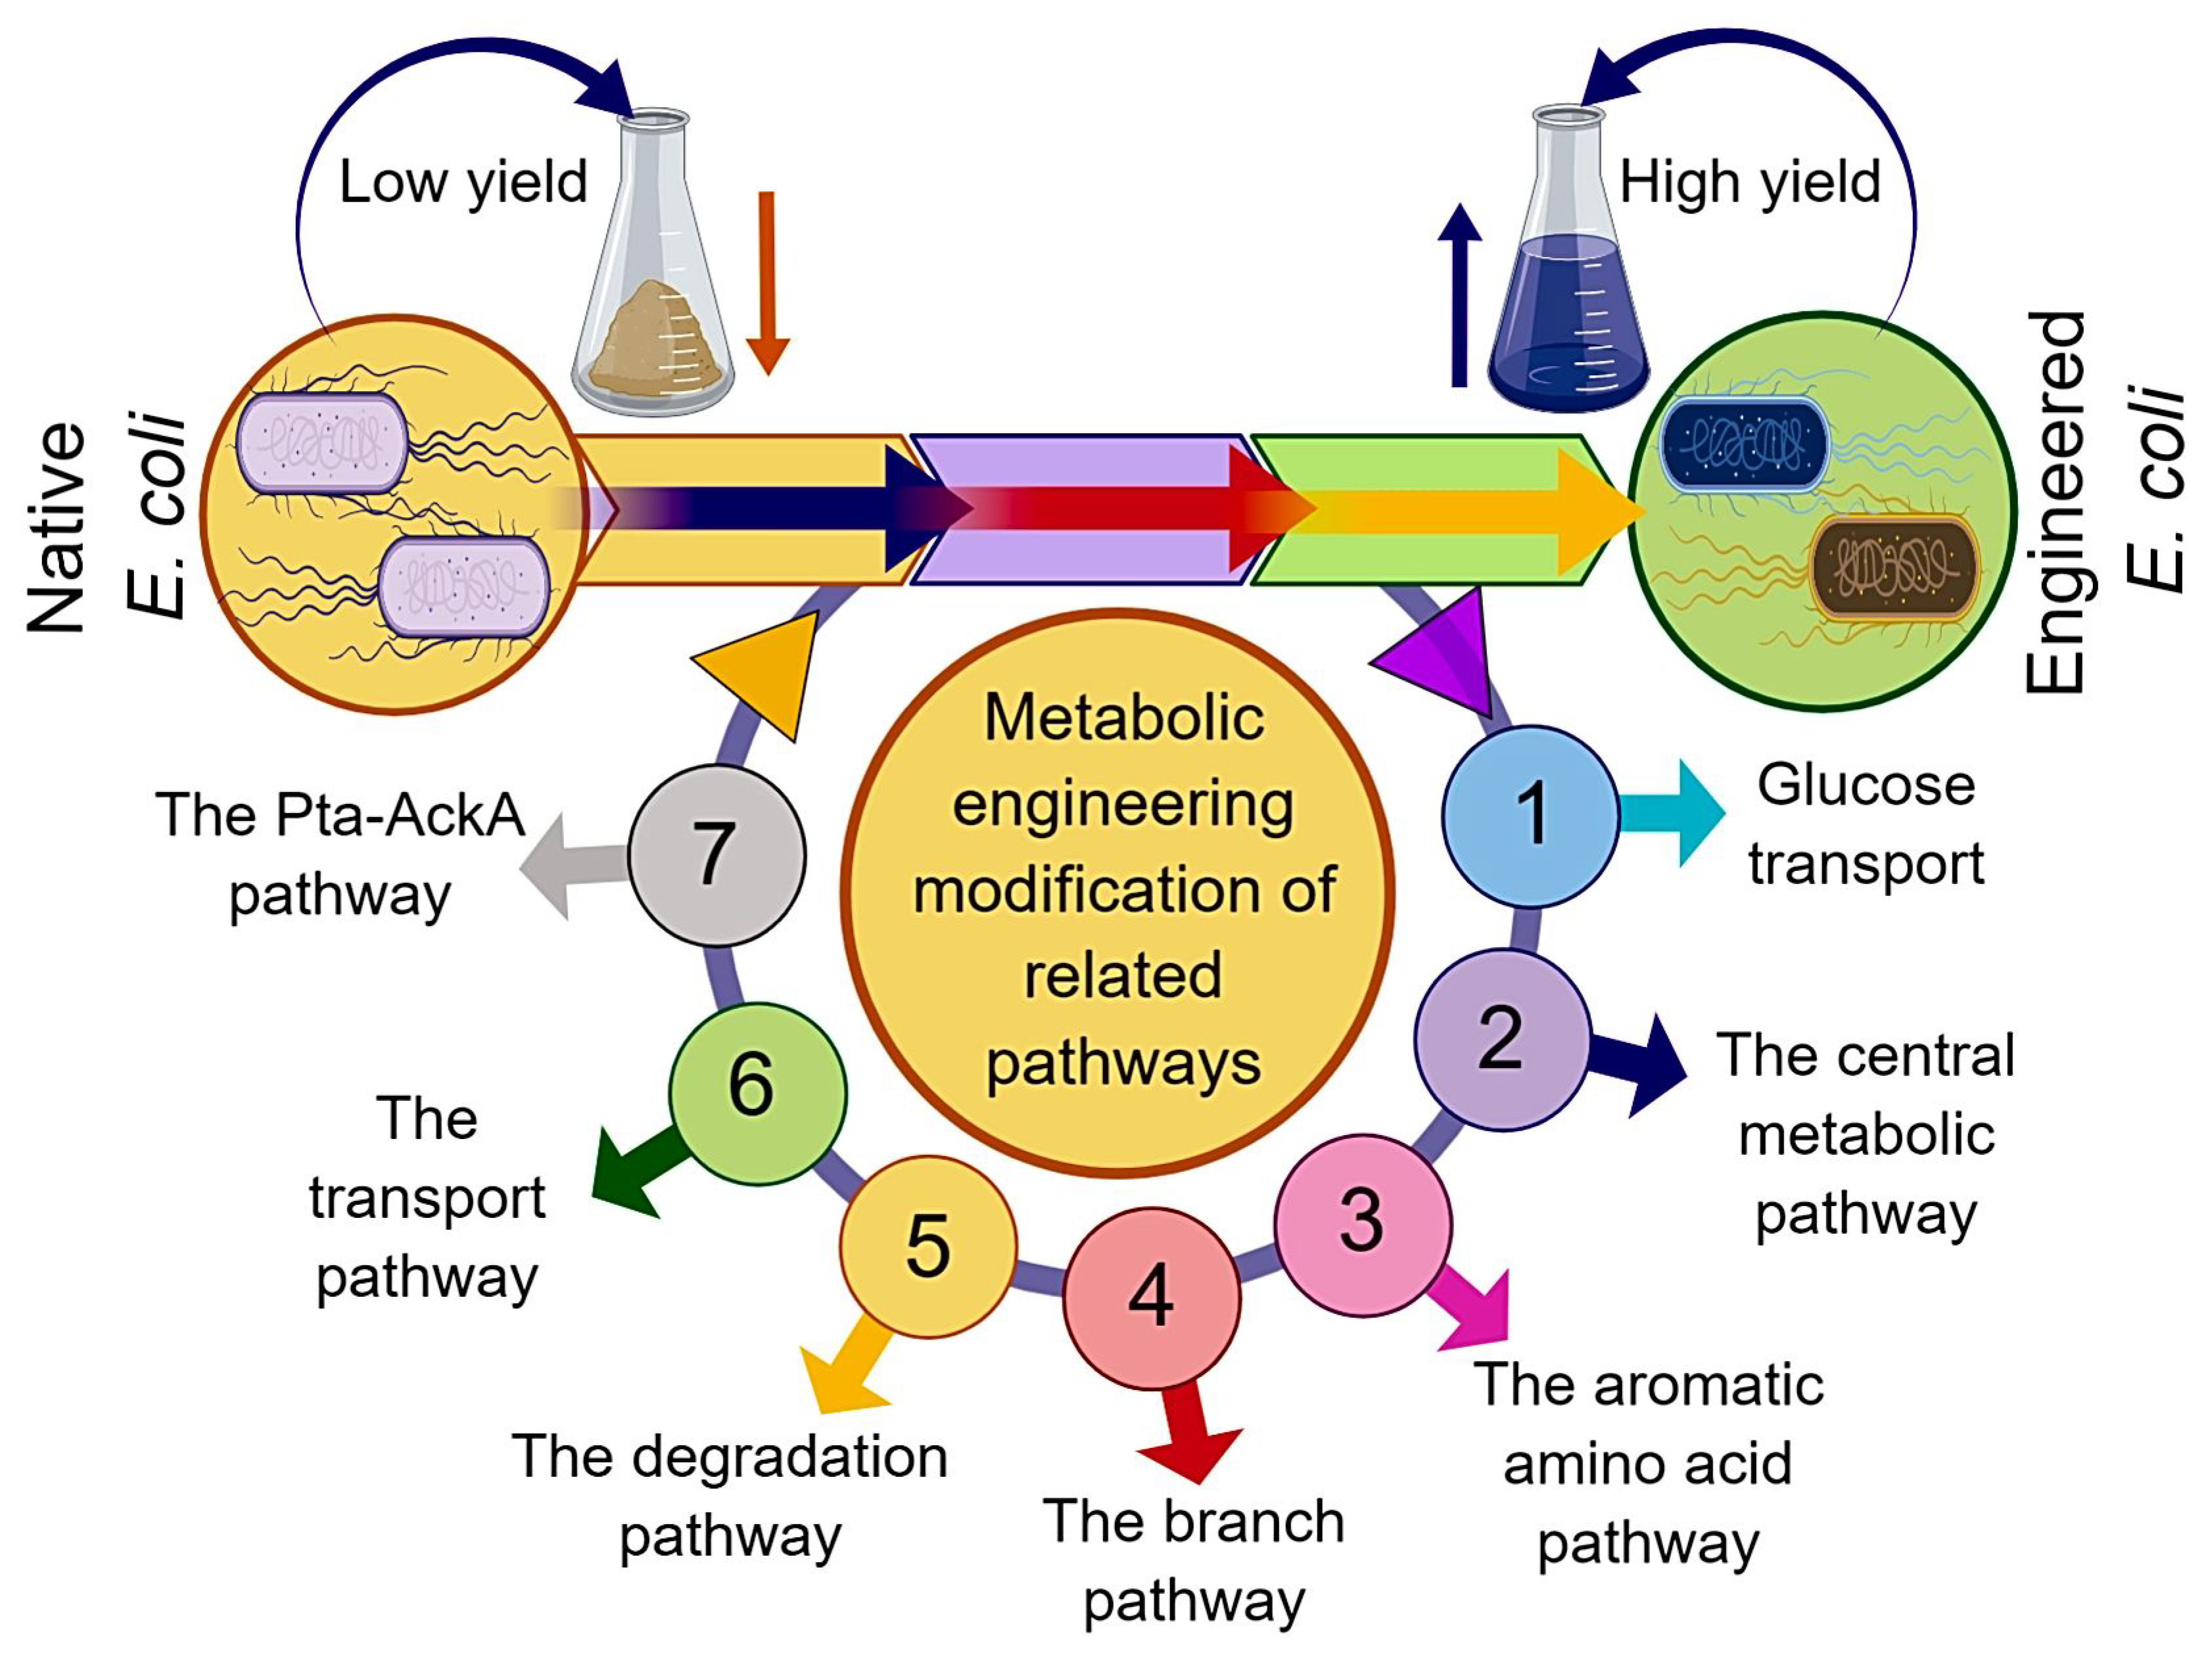 new research on metabolism